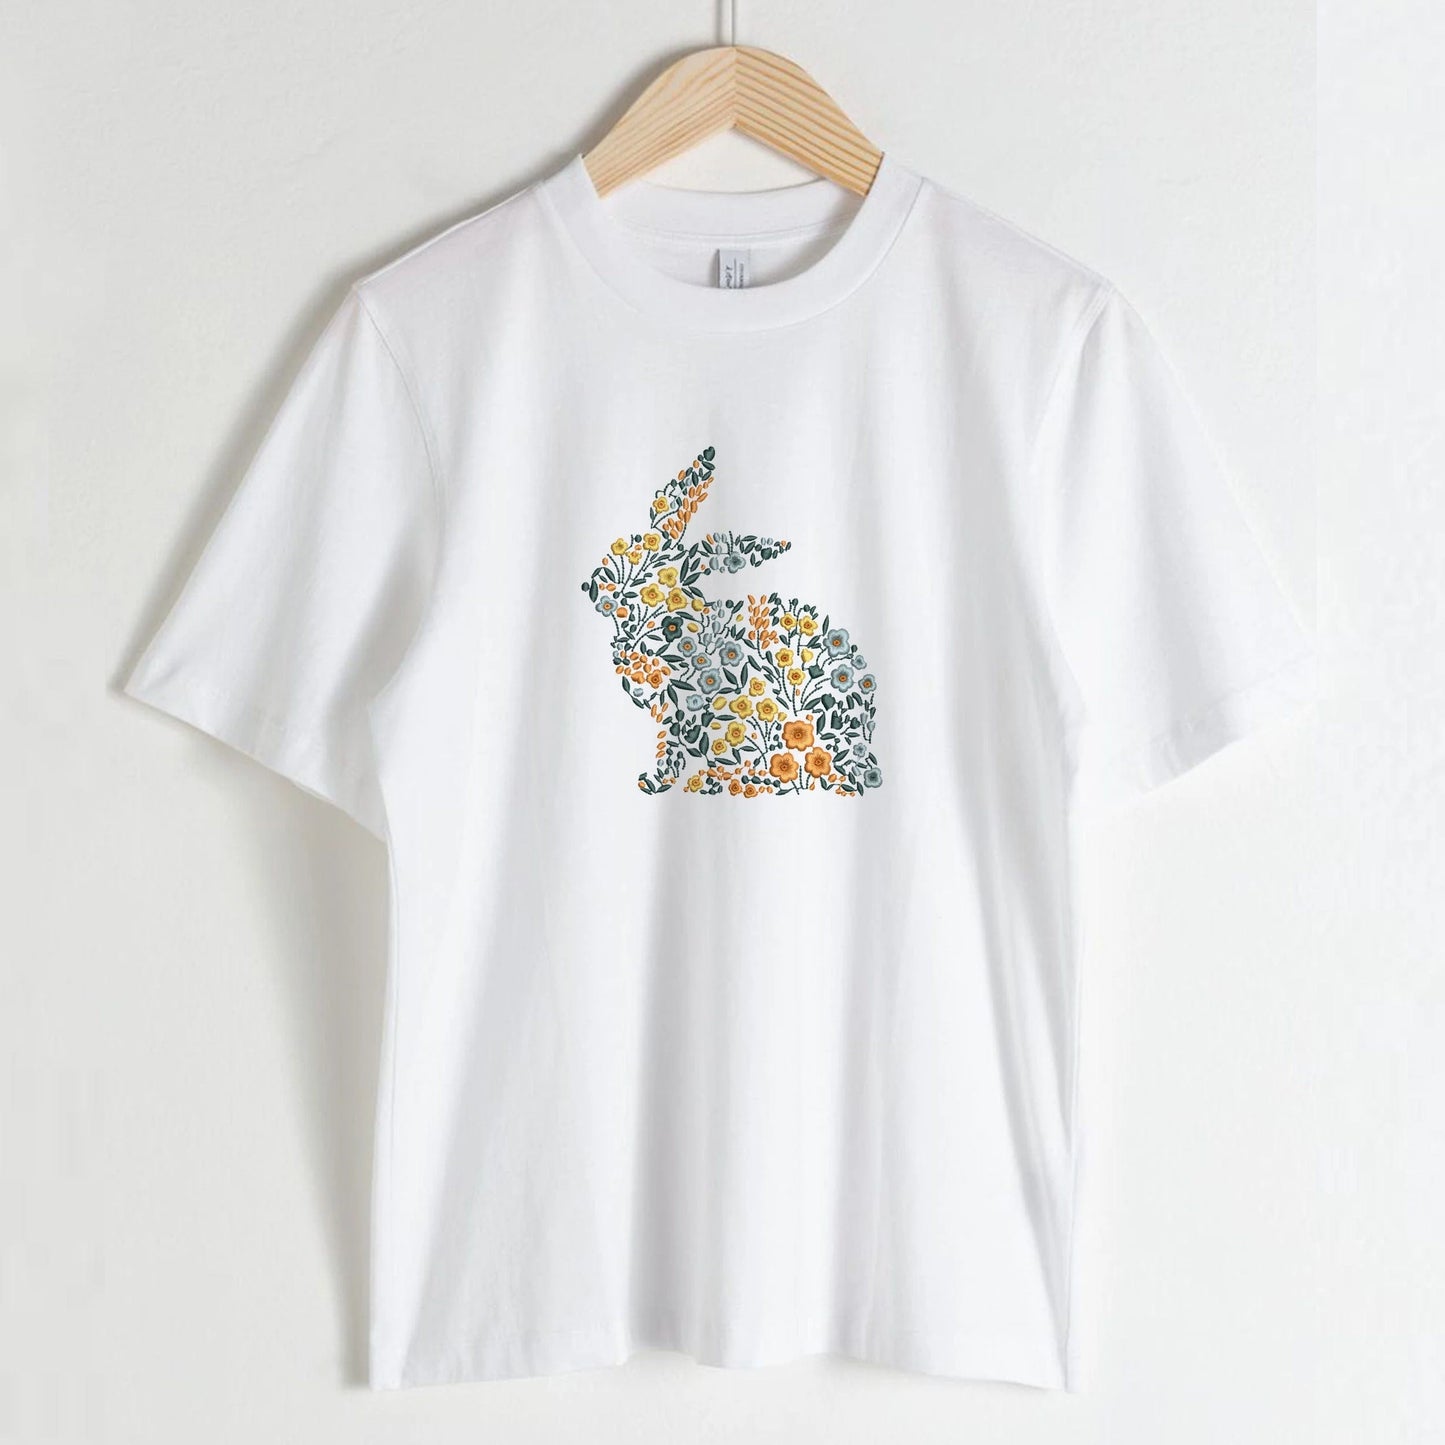 Easter Flower Bunny Machine Embroidery Design on t-shirt and blouse